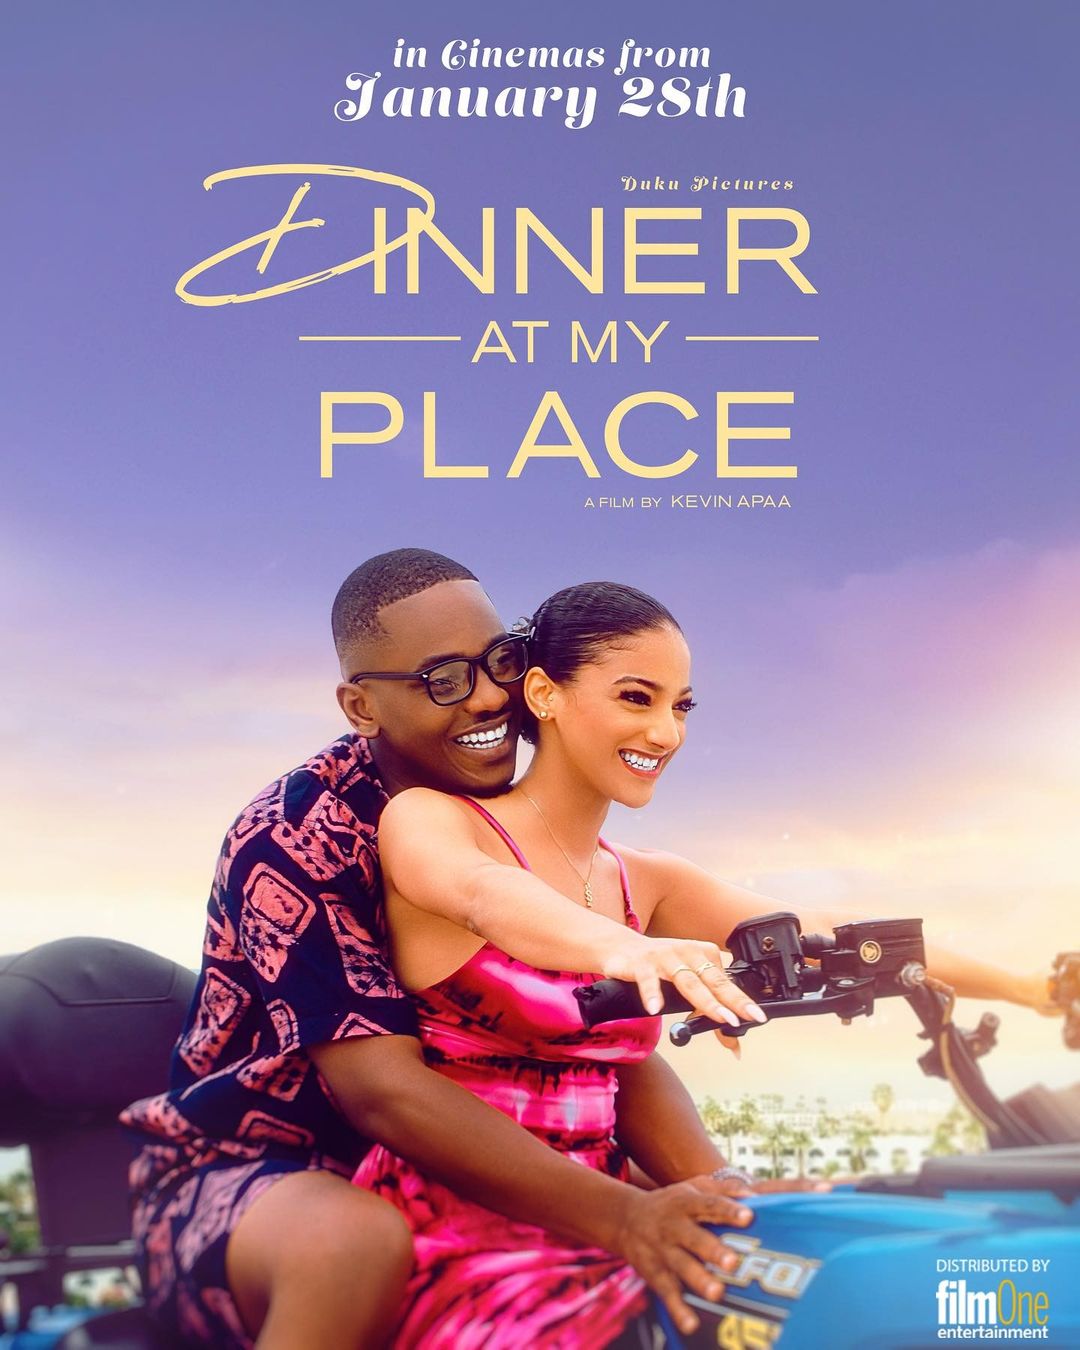 272232062 644655586578771 1265192405972669697 n - How Kevin Luther, a Diaspora Filmmaker Won The 2022’s Valentine Big Screen Market With Dinner At My Place